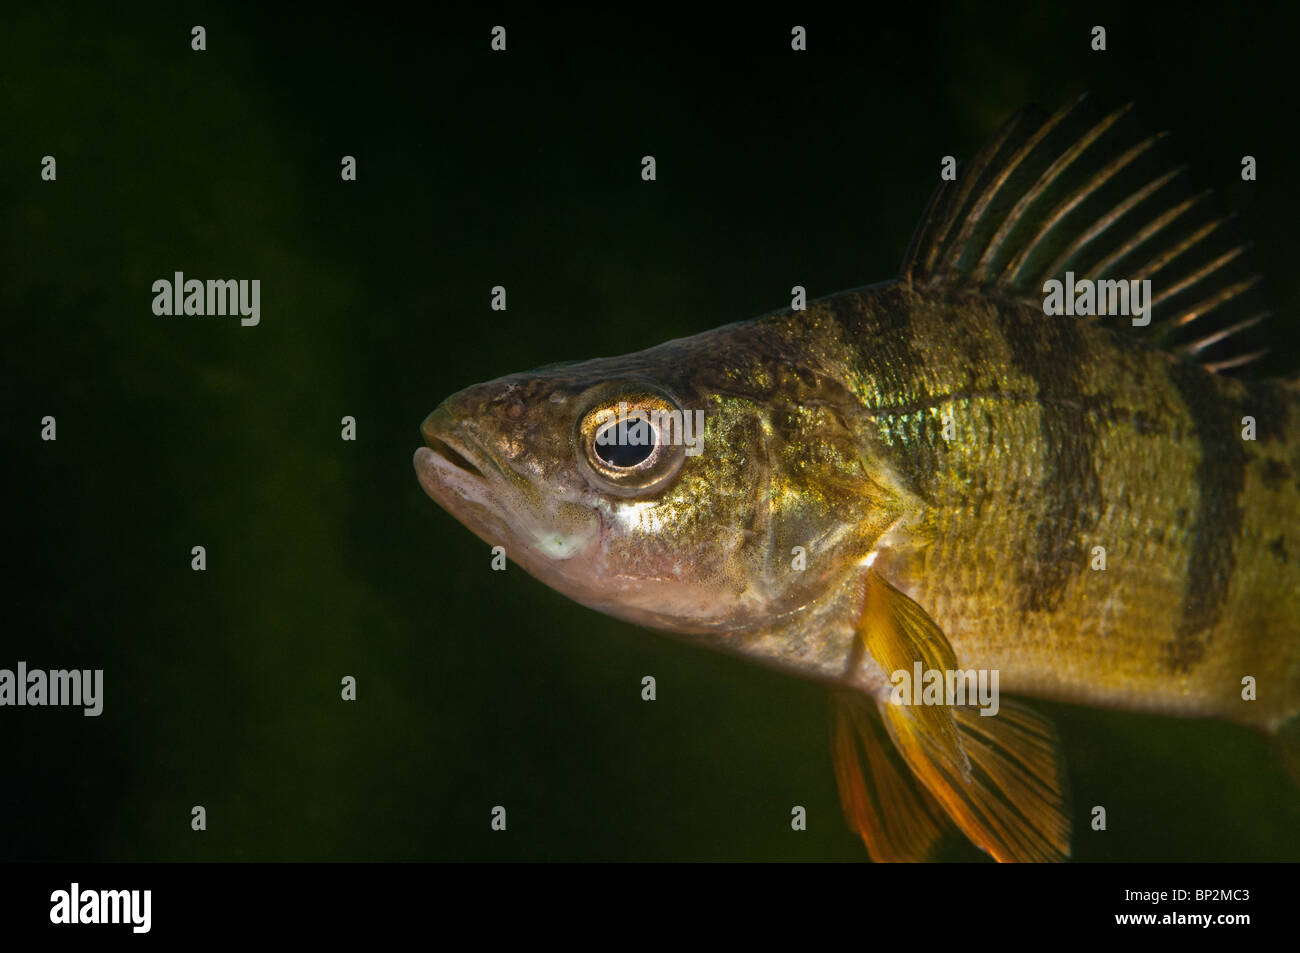 Profile of a Yellow Perch, Perca flavescens, freshwater fish. Stock Photo